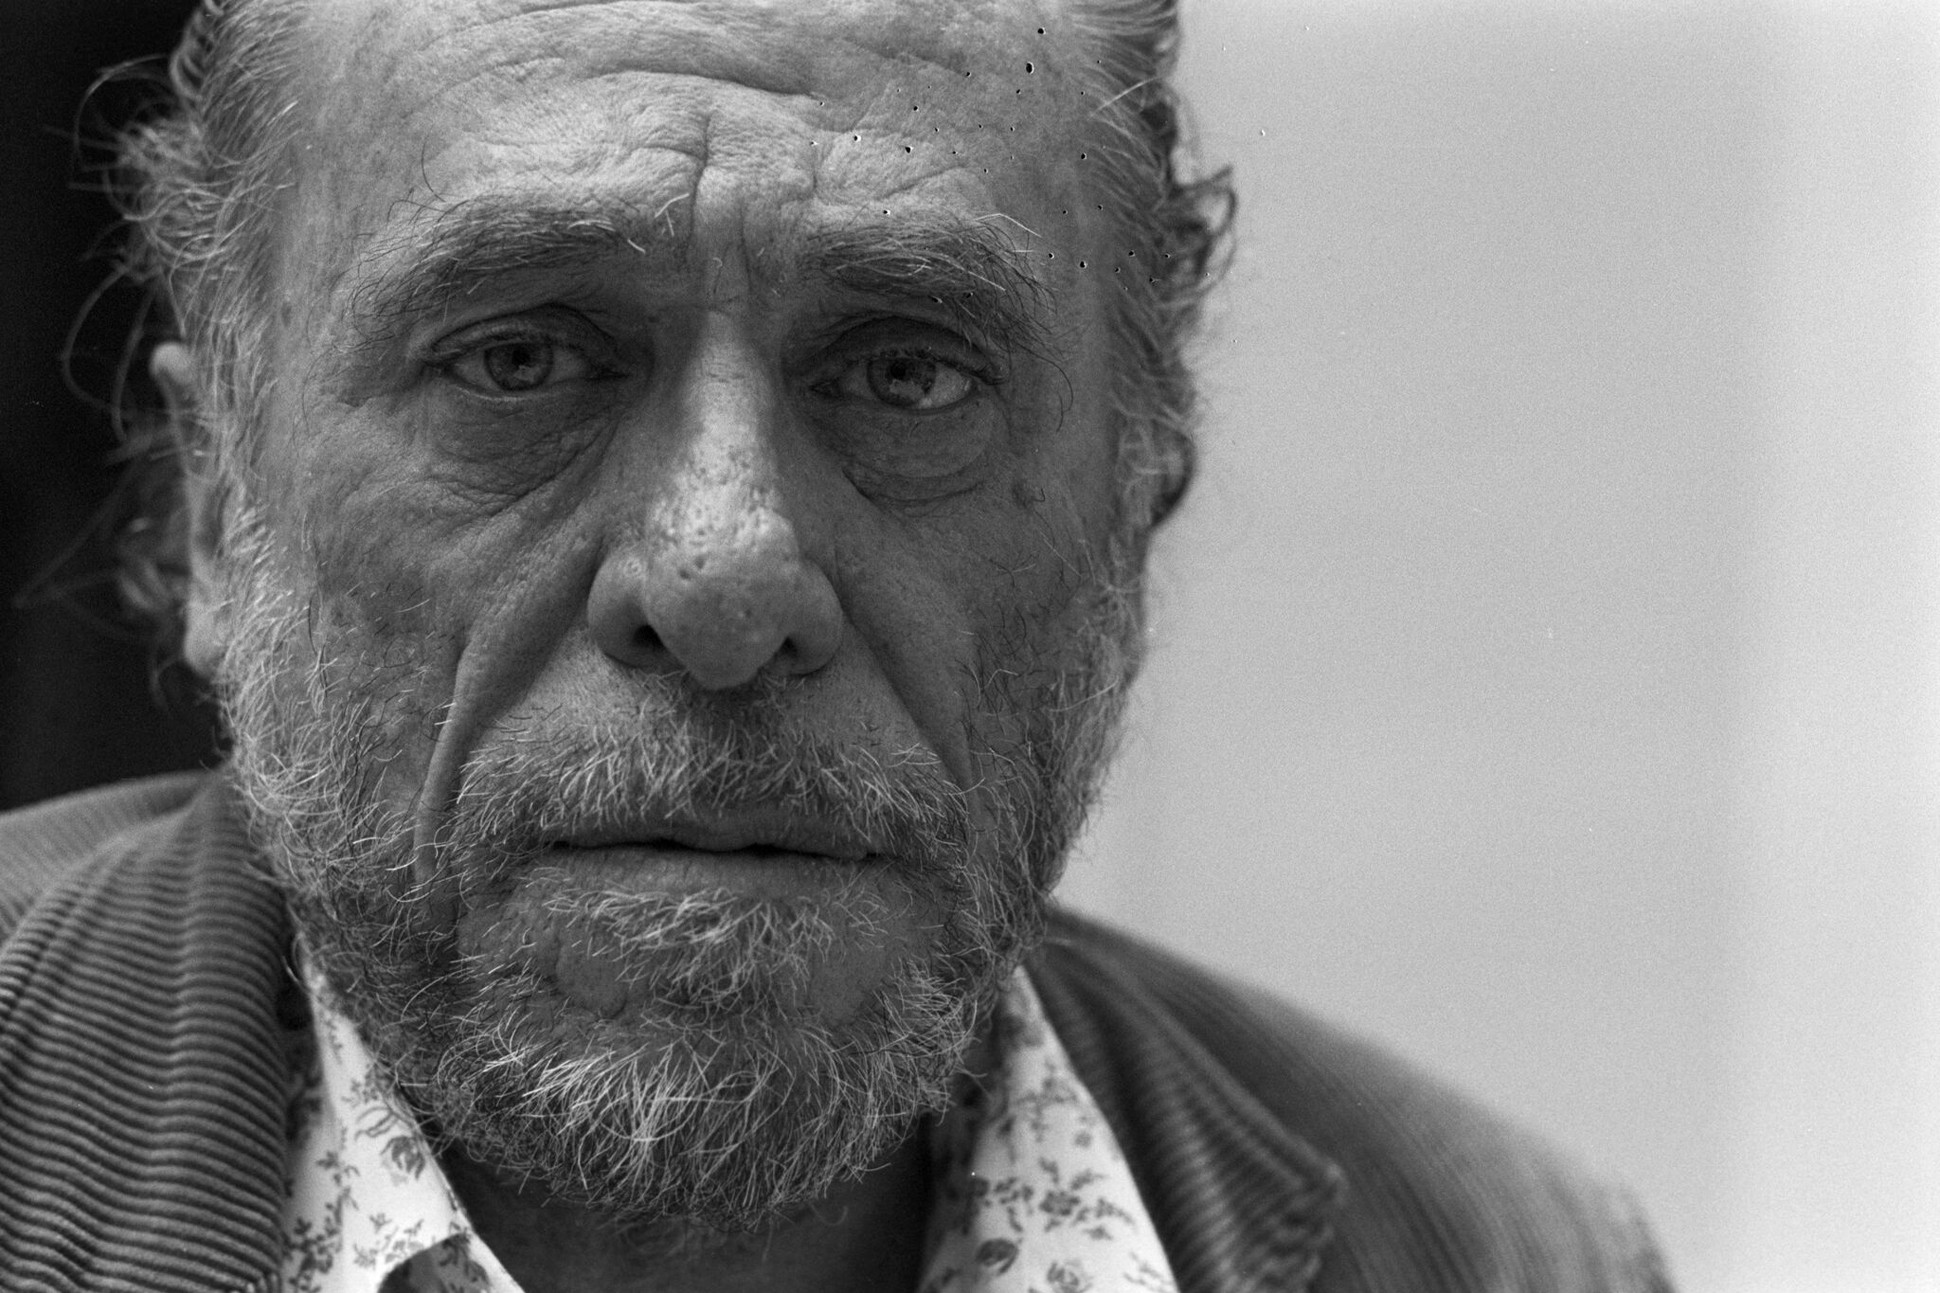 Inspirational Quotes from Charles Bukowski